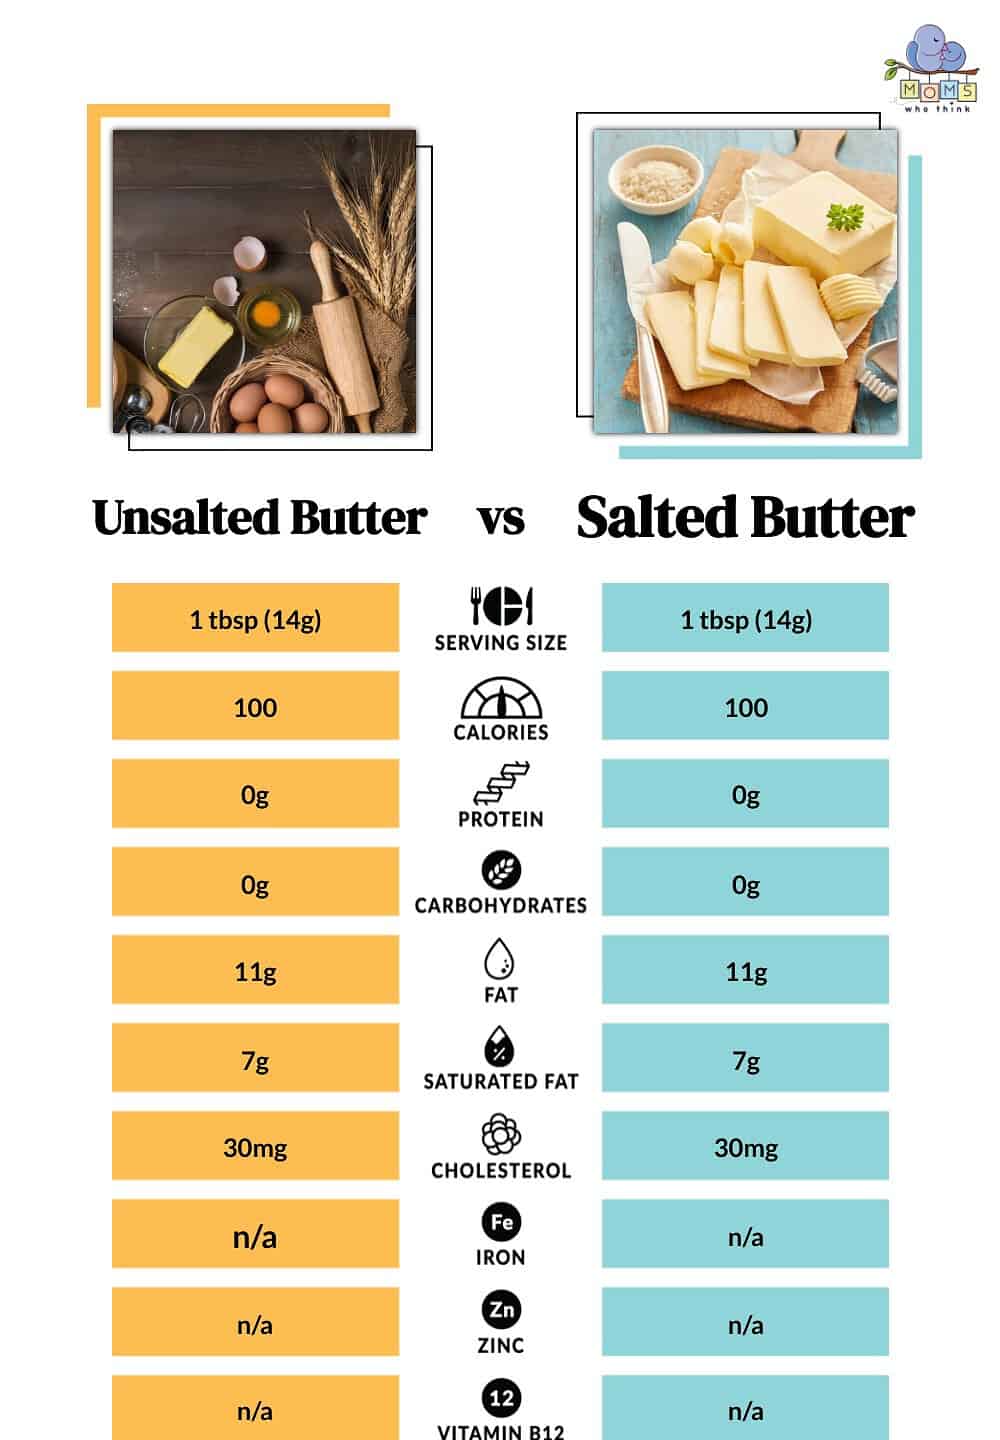 Unsalted Butter vs Salted Butter Nutritional Facts